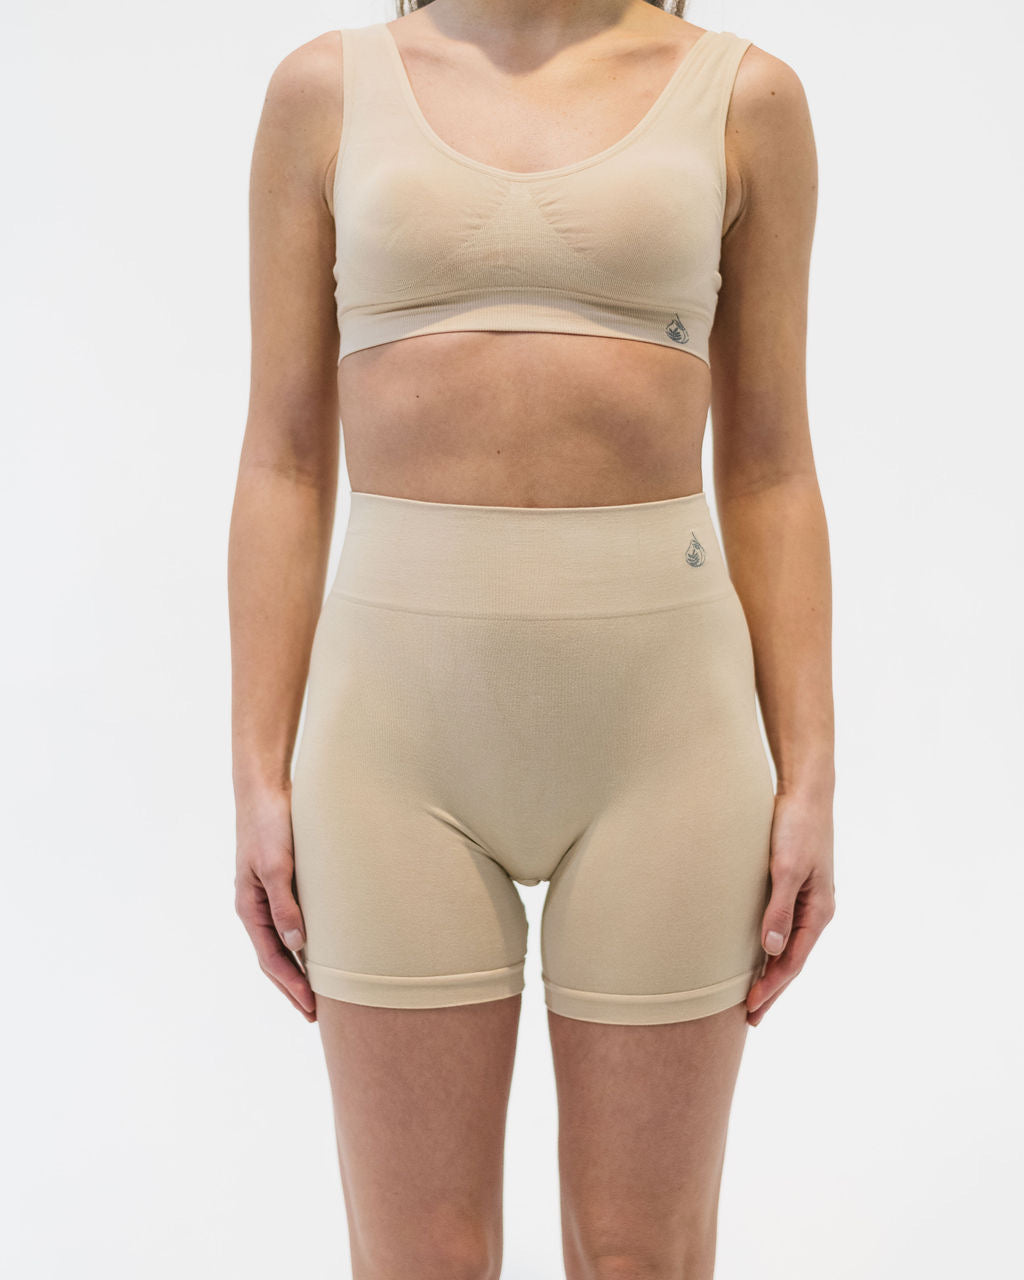 More of Me to Love Cotton and Viscose Derived from Bamboo Bra Liner  (Medium, 3-Pack, Beige) - Wicking, Soft, Easy-Care at  Women's  Clothing store